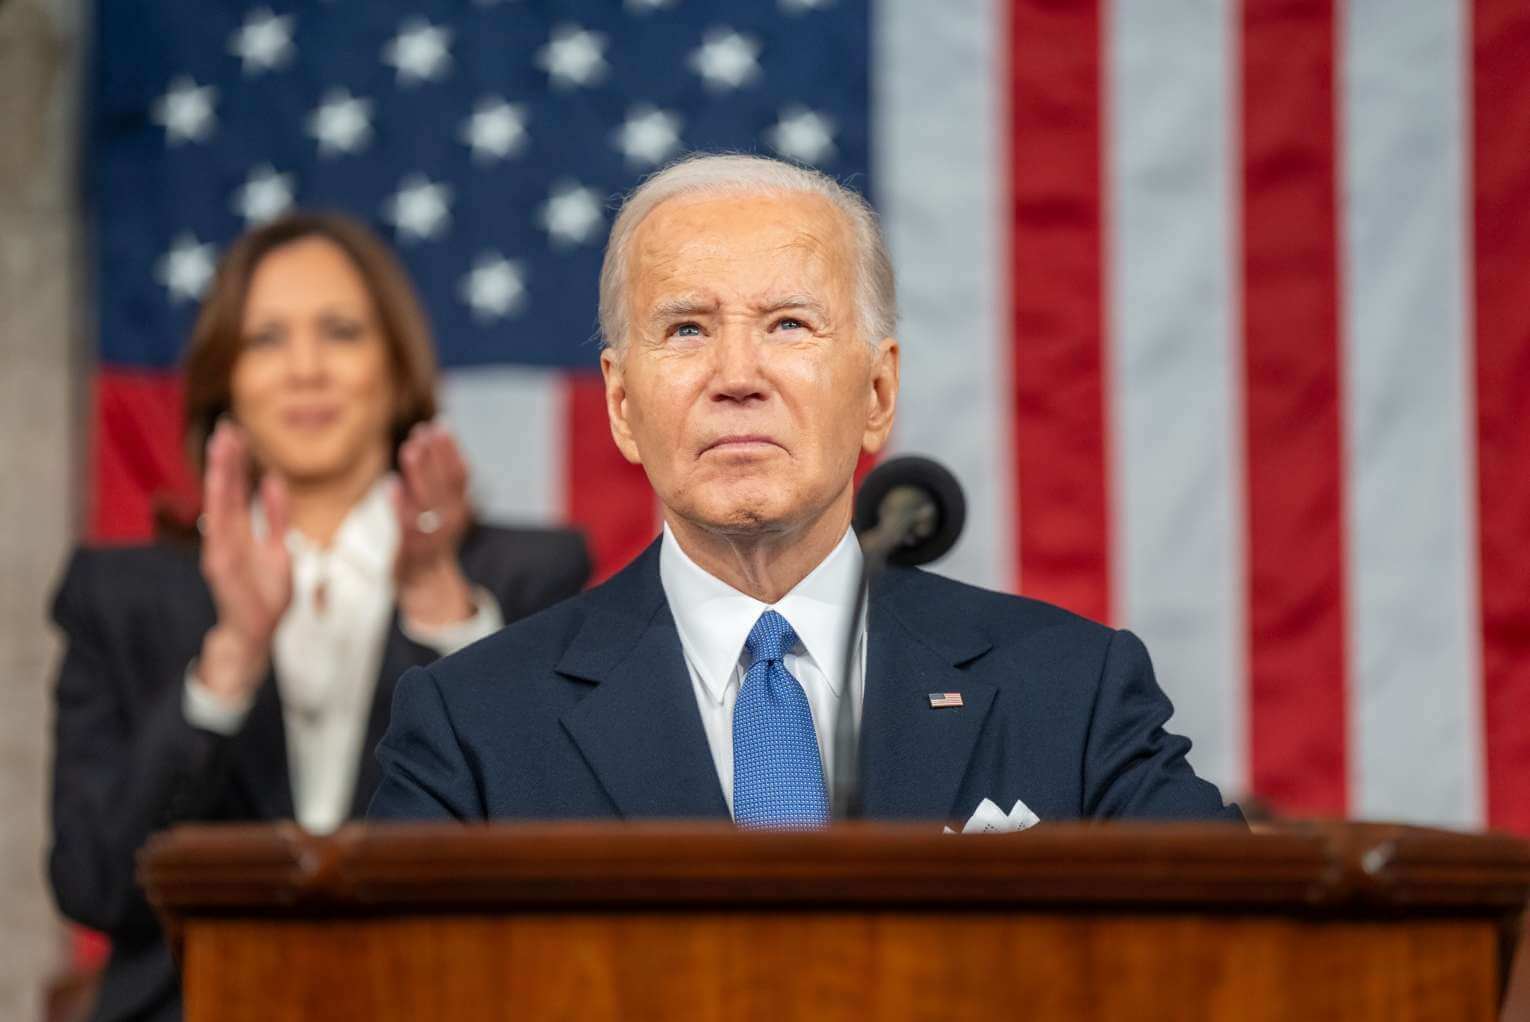 Did Biden Give a Prophetic Word?